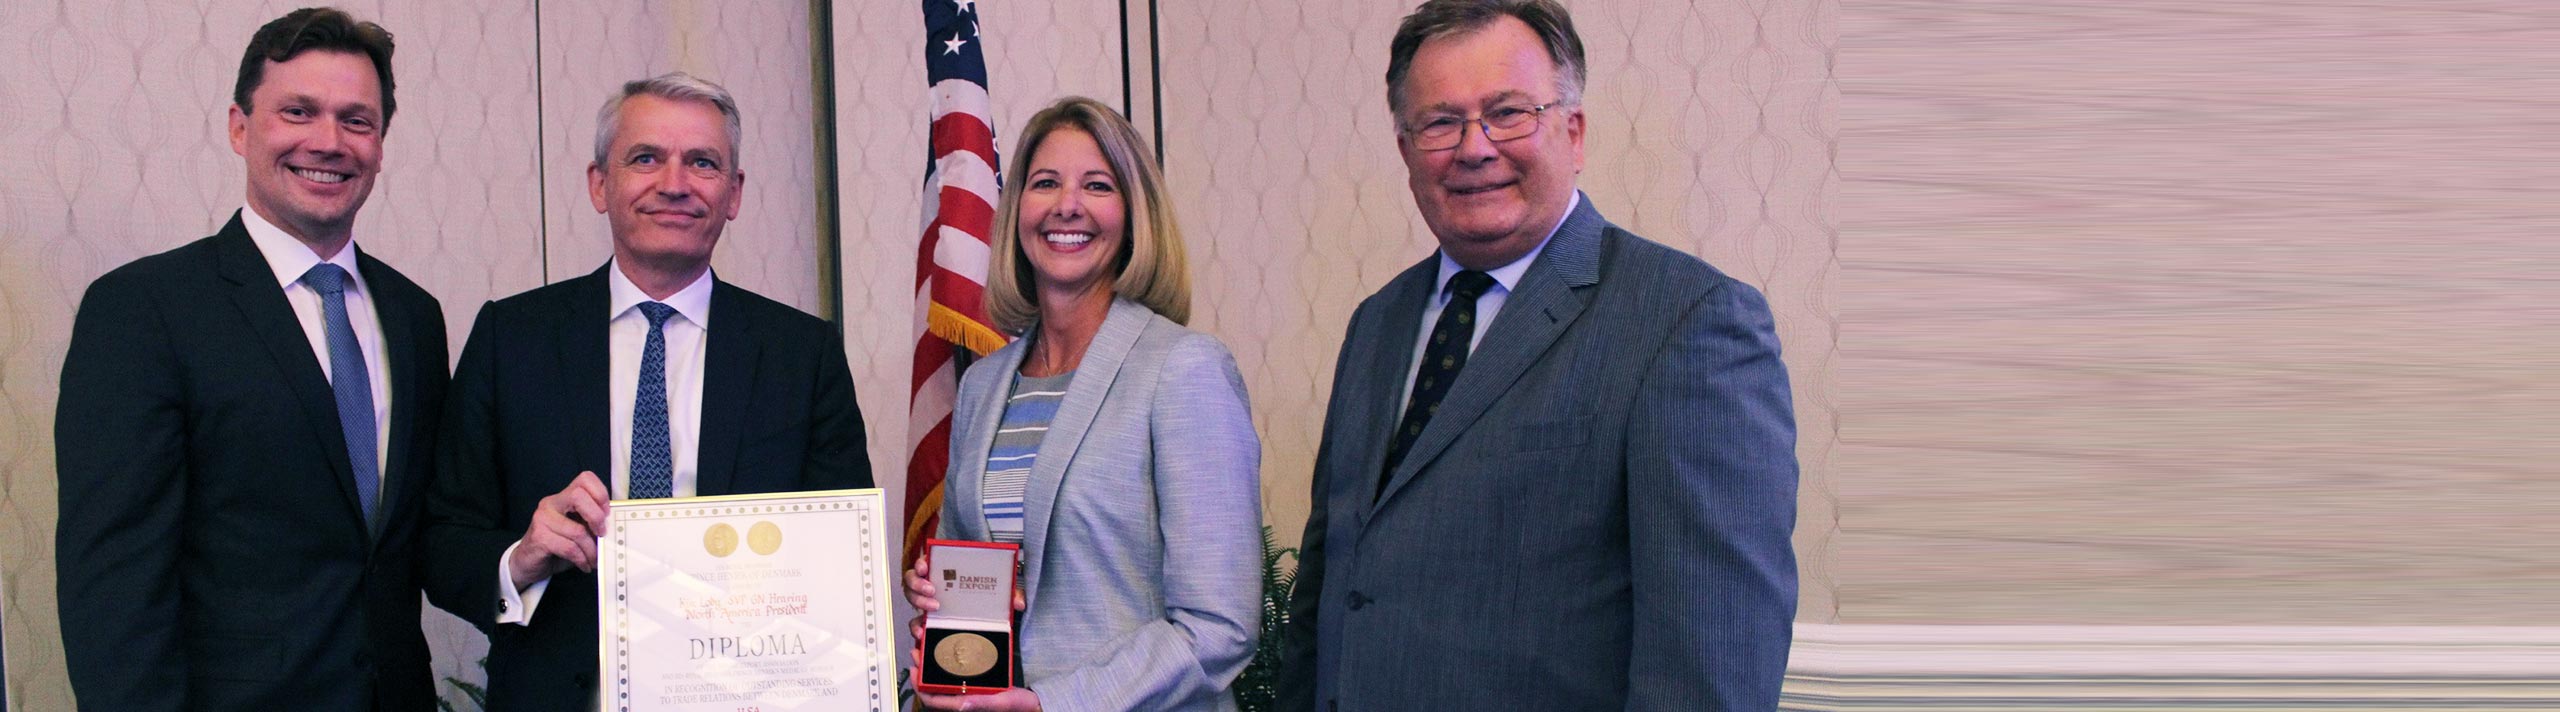 GN Hearing’s US President Kim Lody Receives Royal Medal of Honor